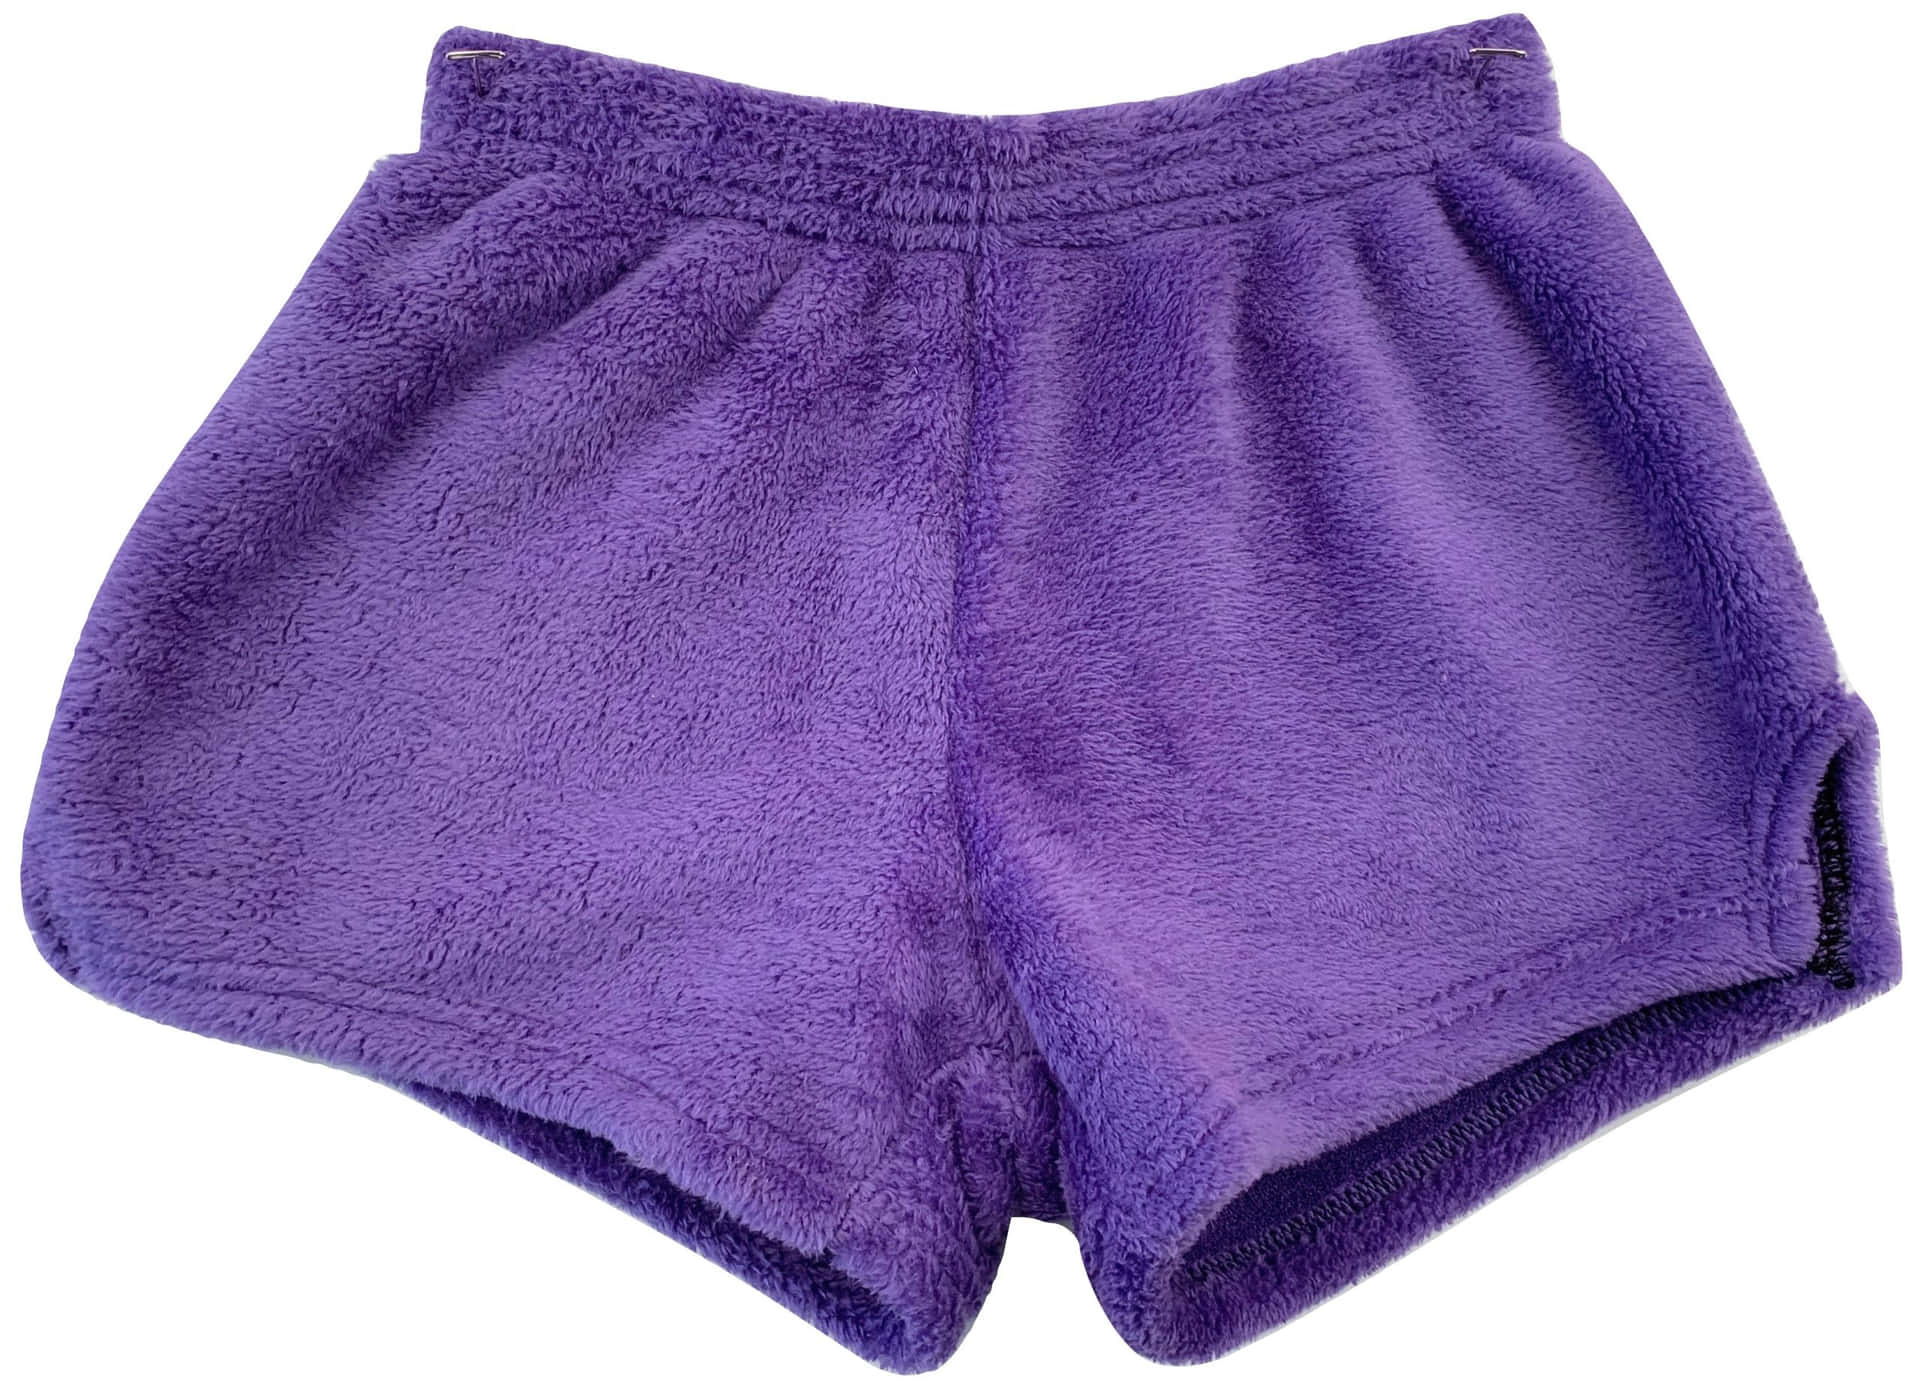 Stand Out from the Crowd in These Unique Purple Shorts Wallpaper